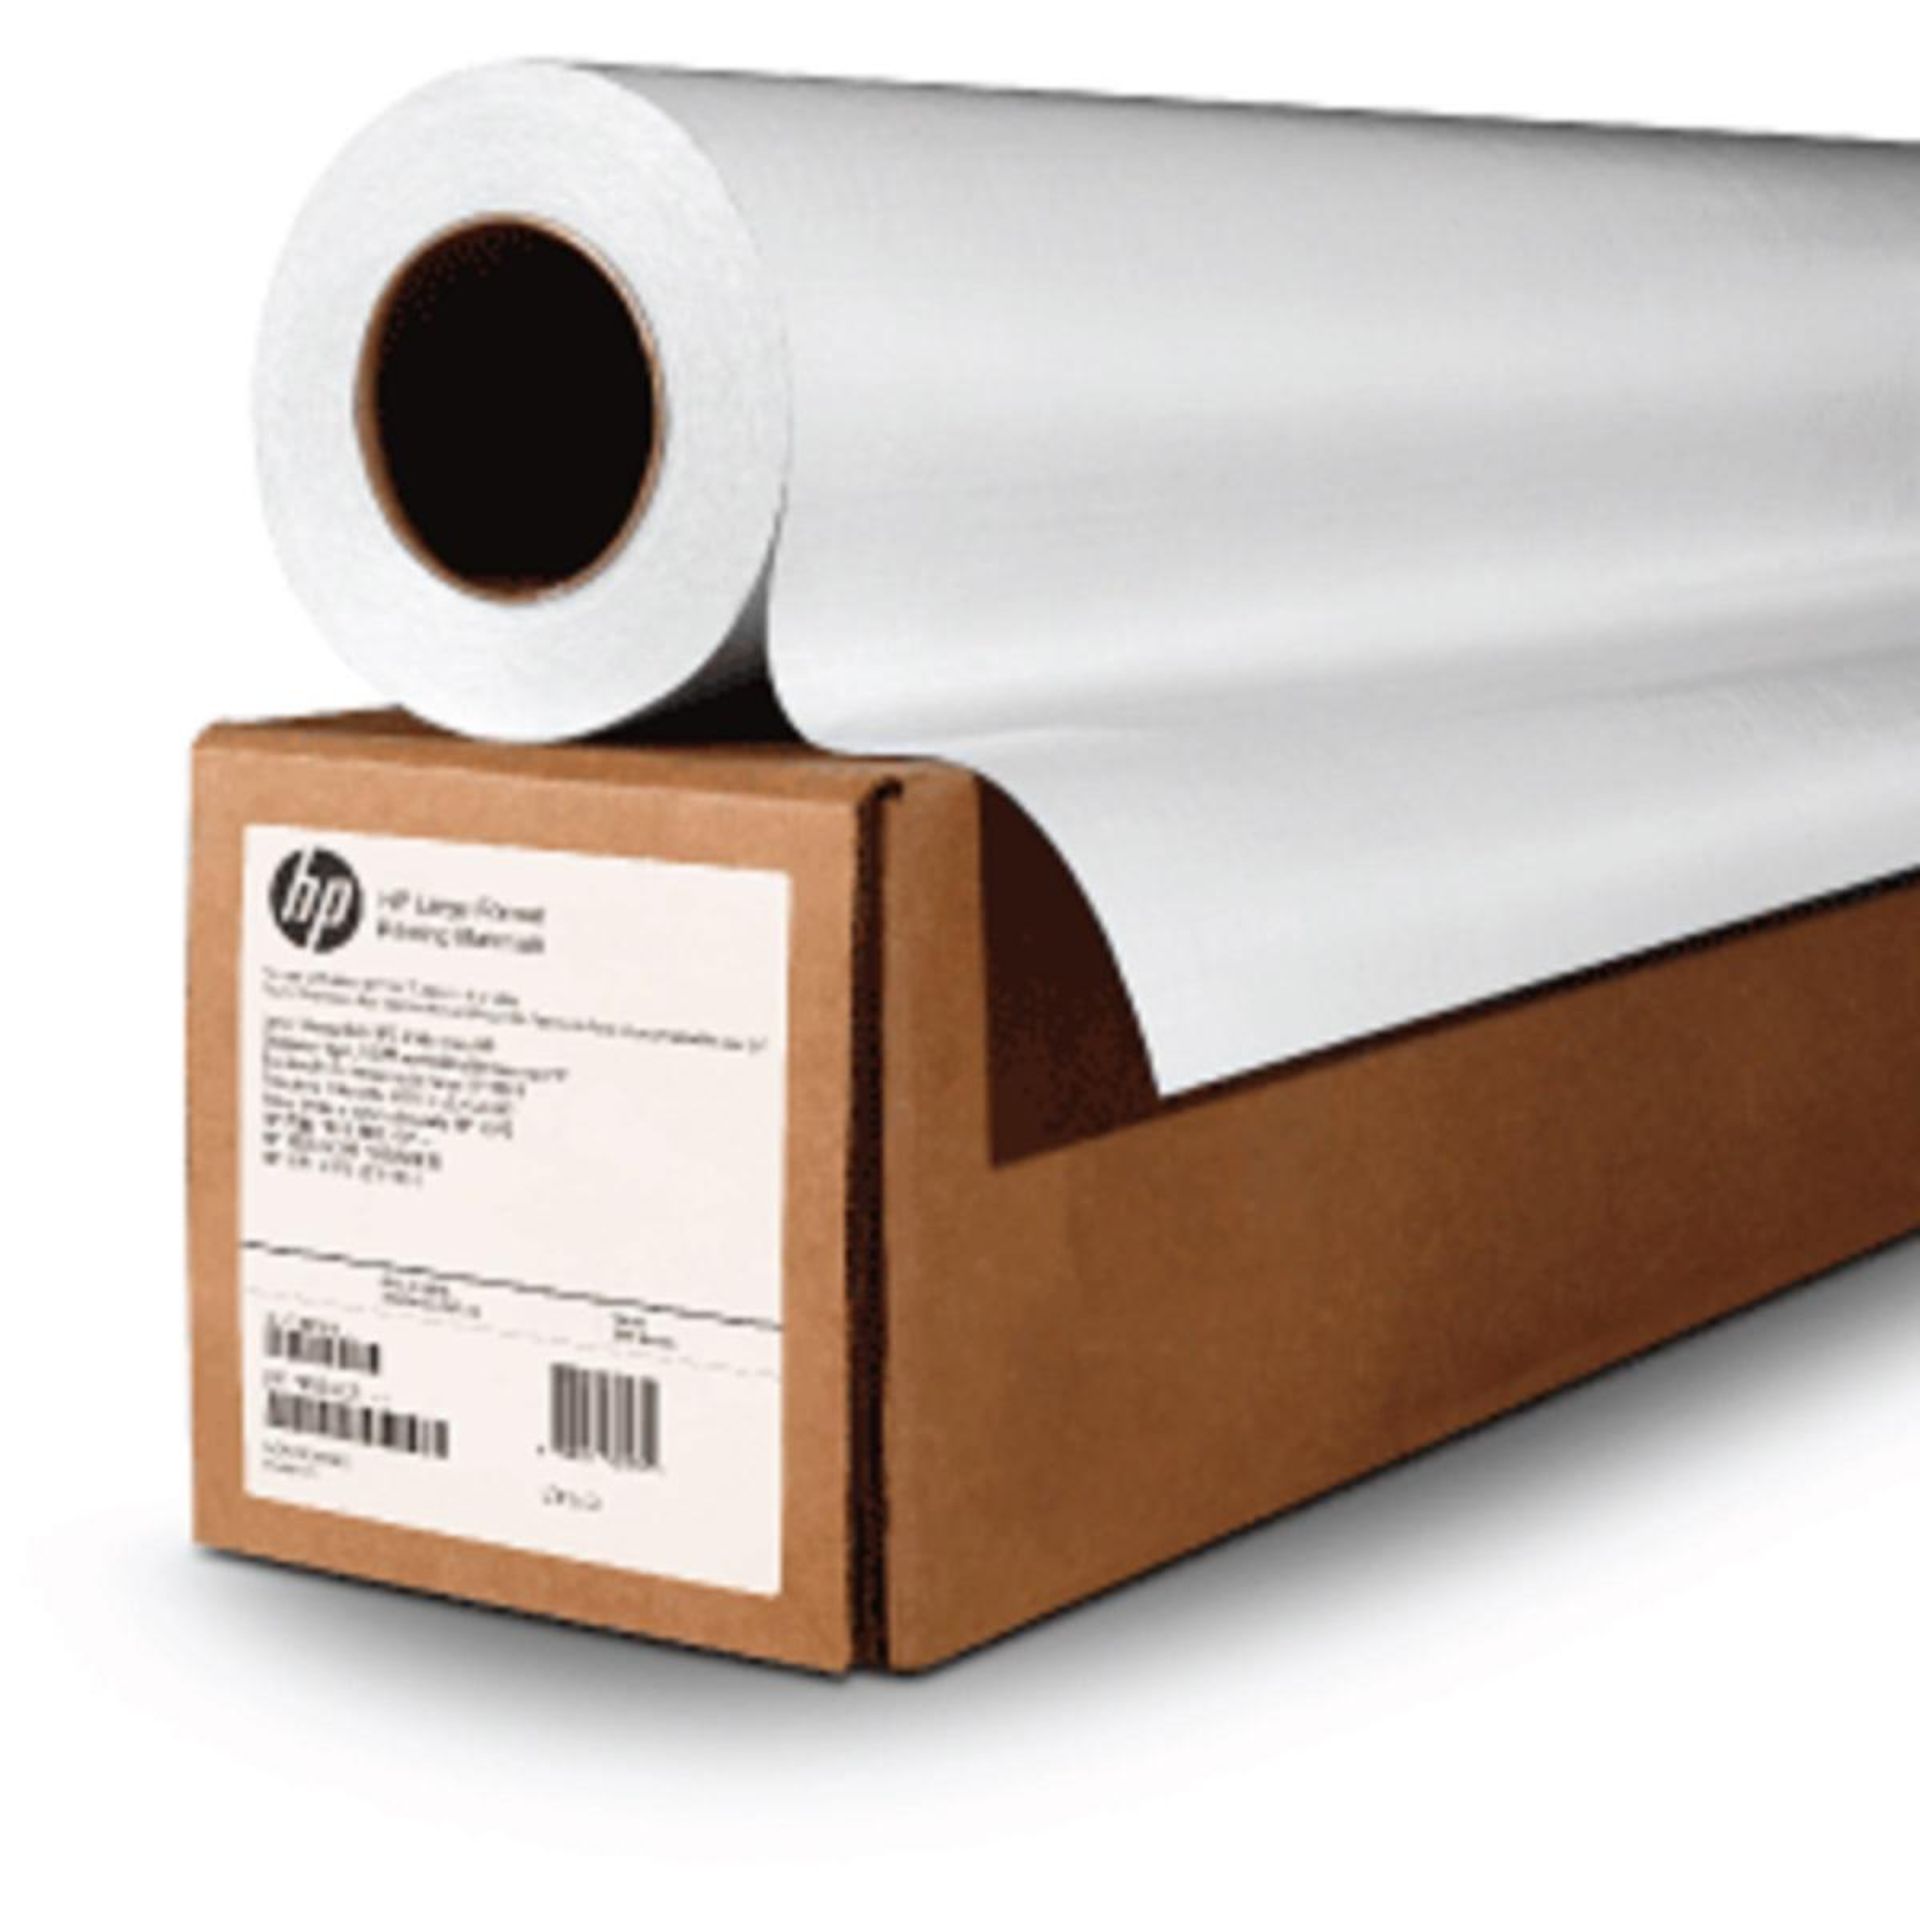 4 x HP Universal Heavyweight Coated Paper, 36" x 100' Roll - Image 2 of 2